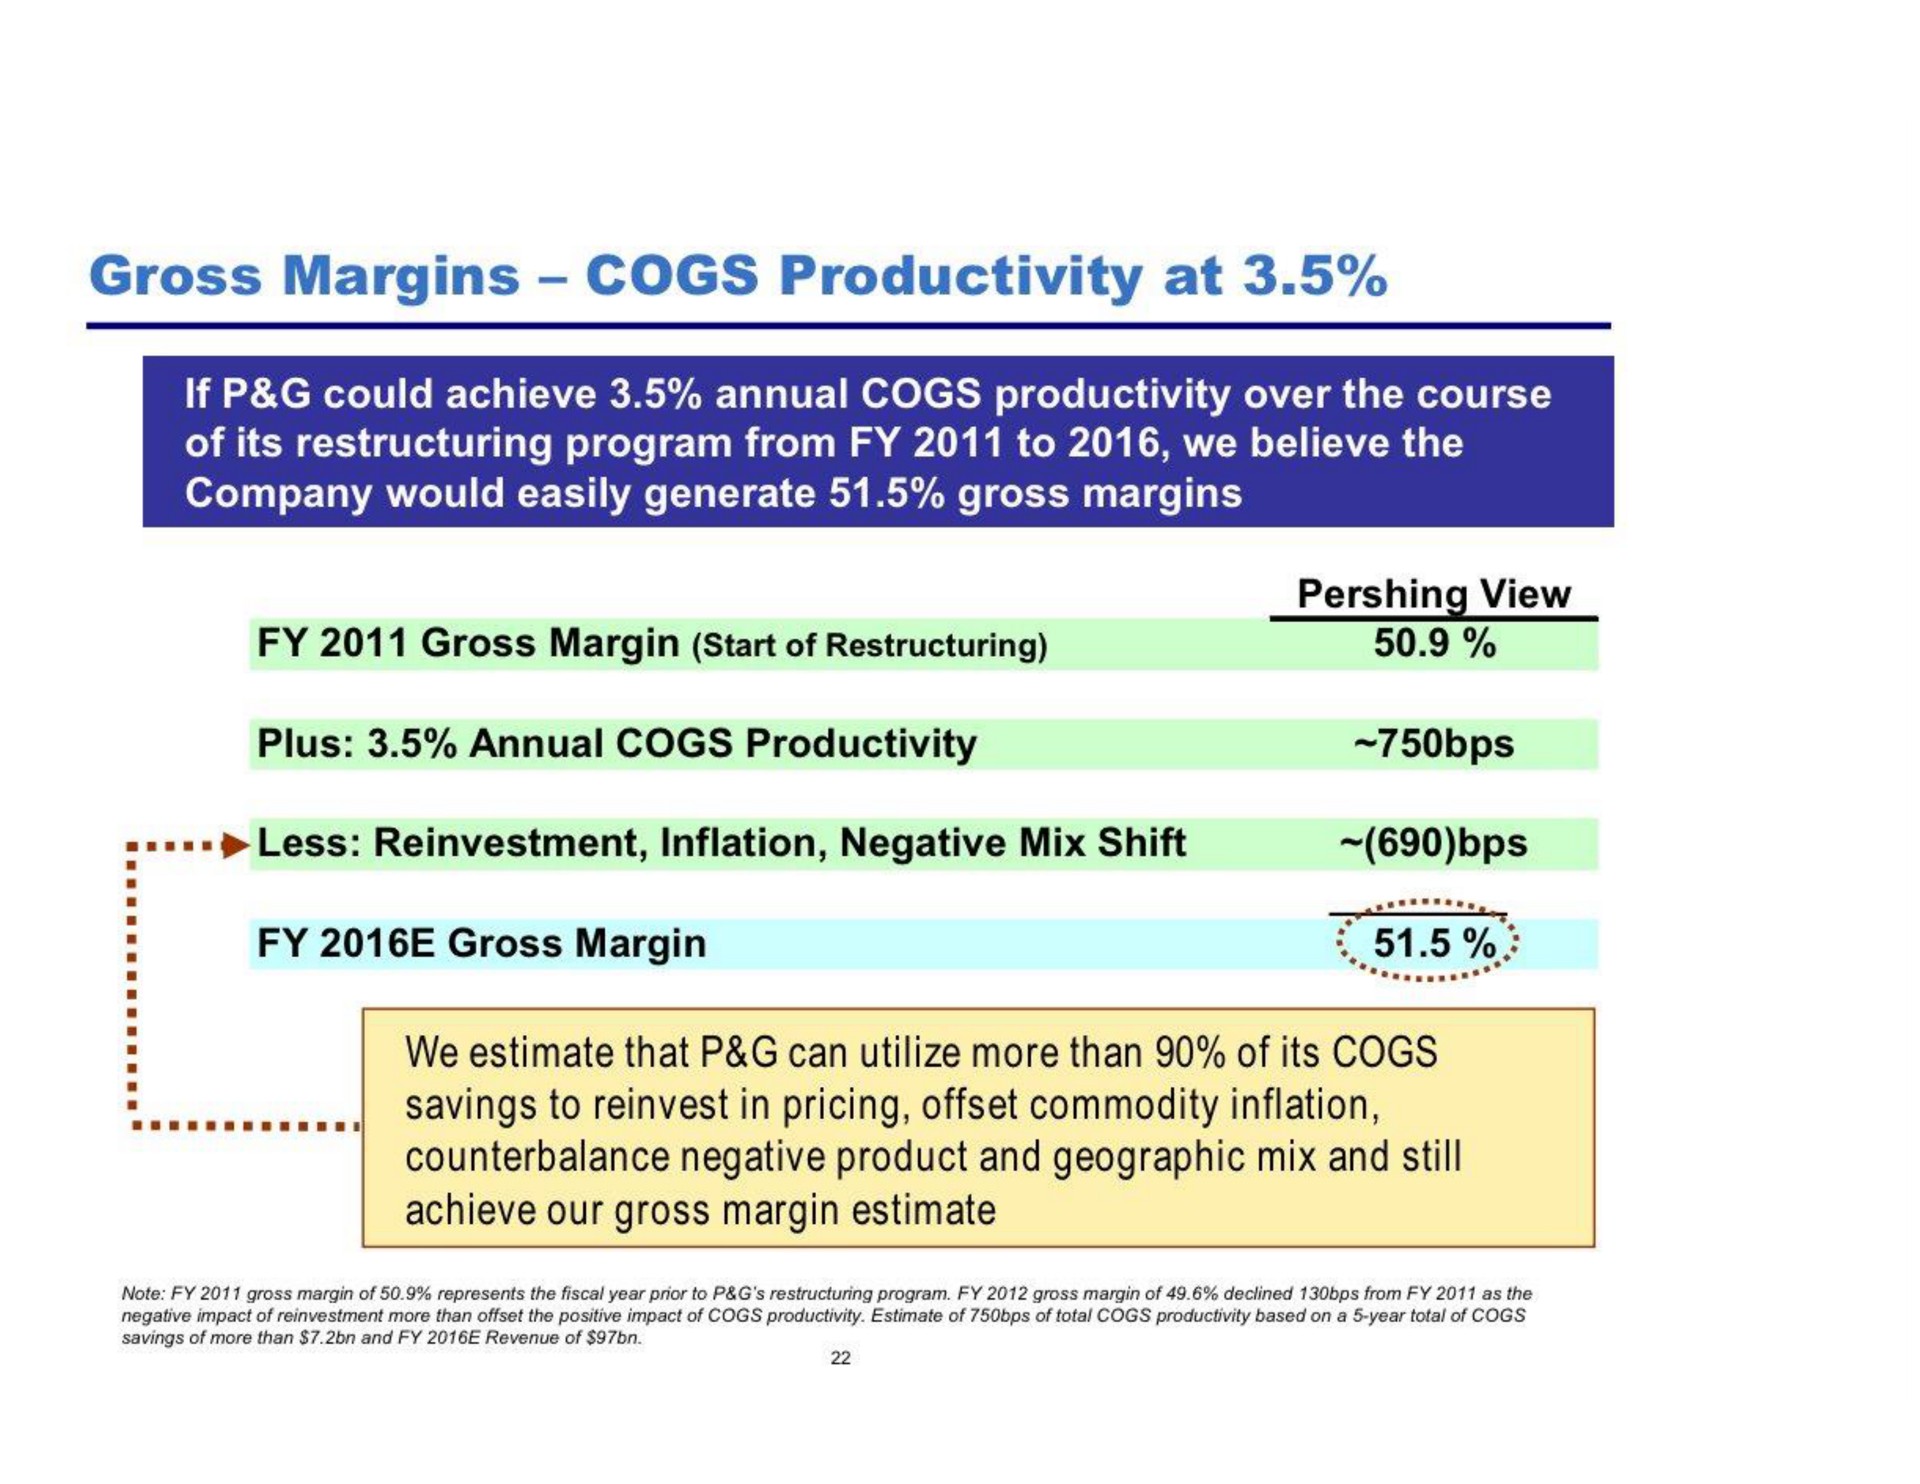 gross margins cogs productivity at gross margin we estimate that can utilize more than of its cogs | Pershing Square